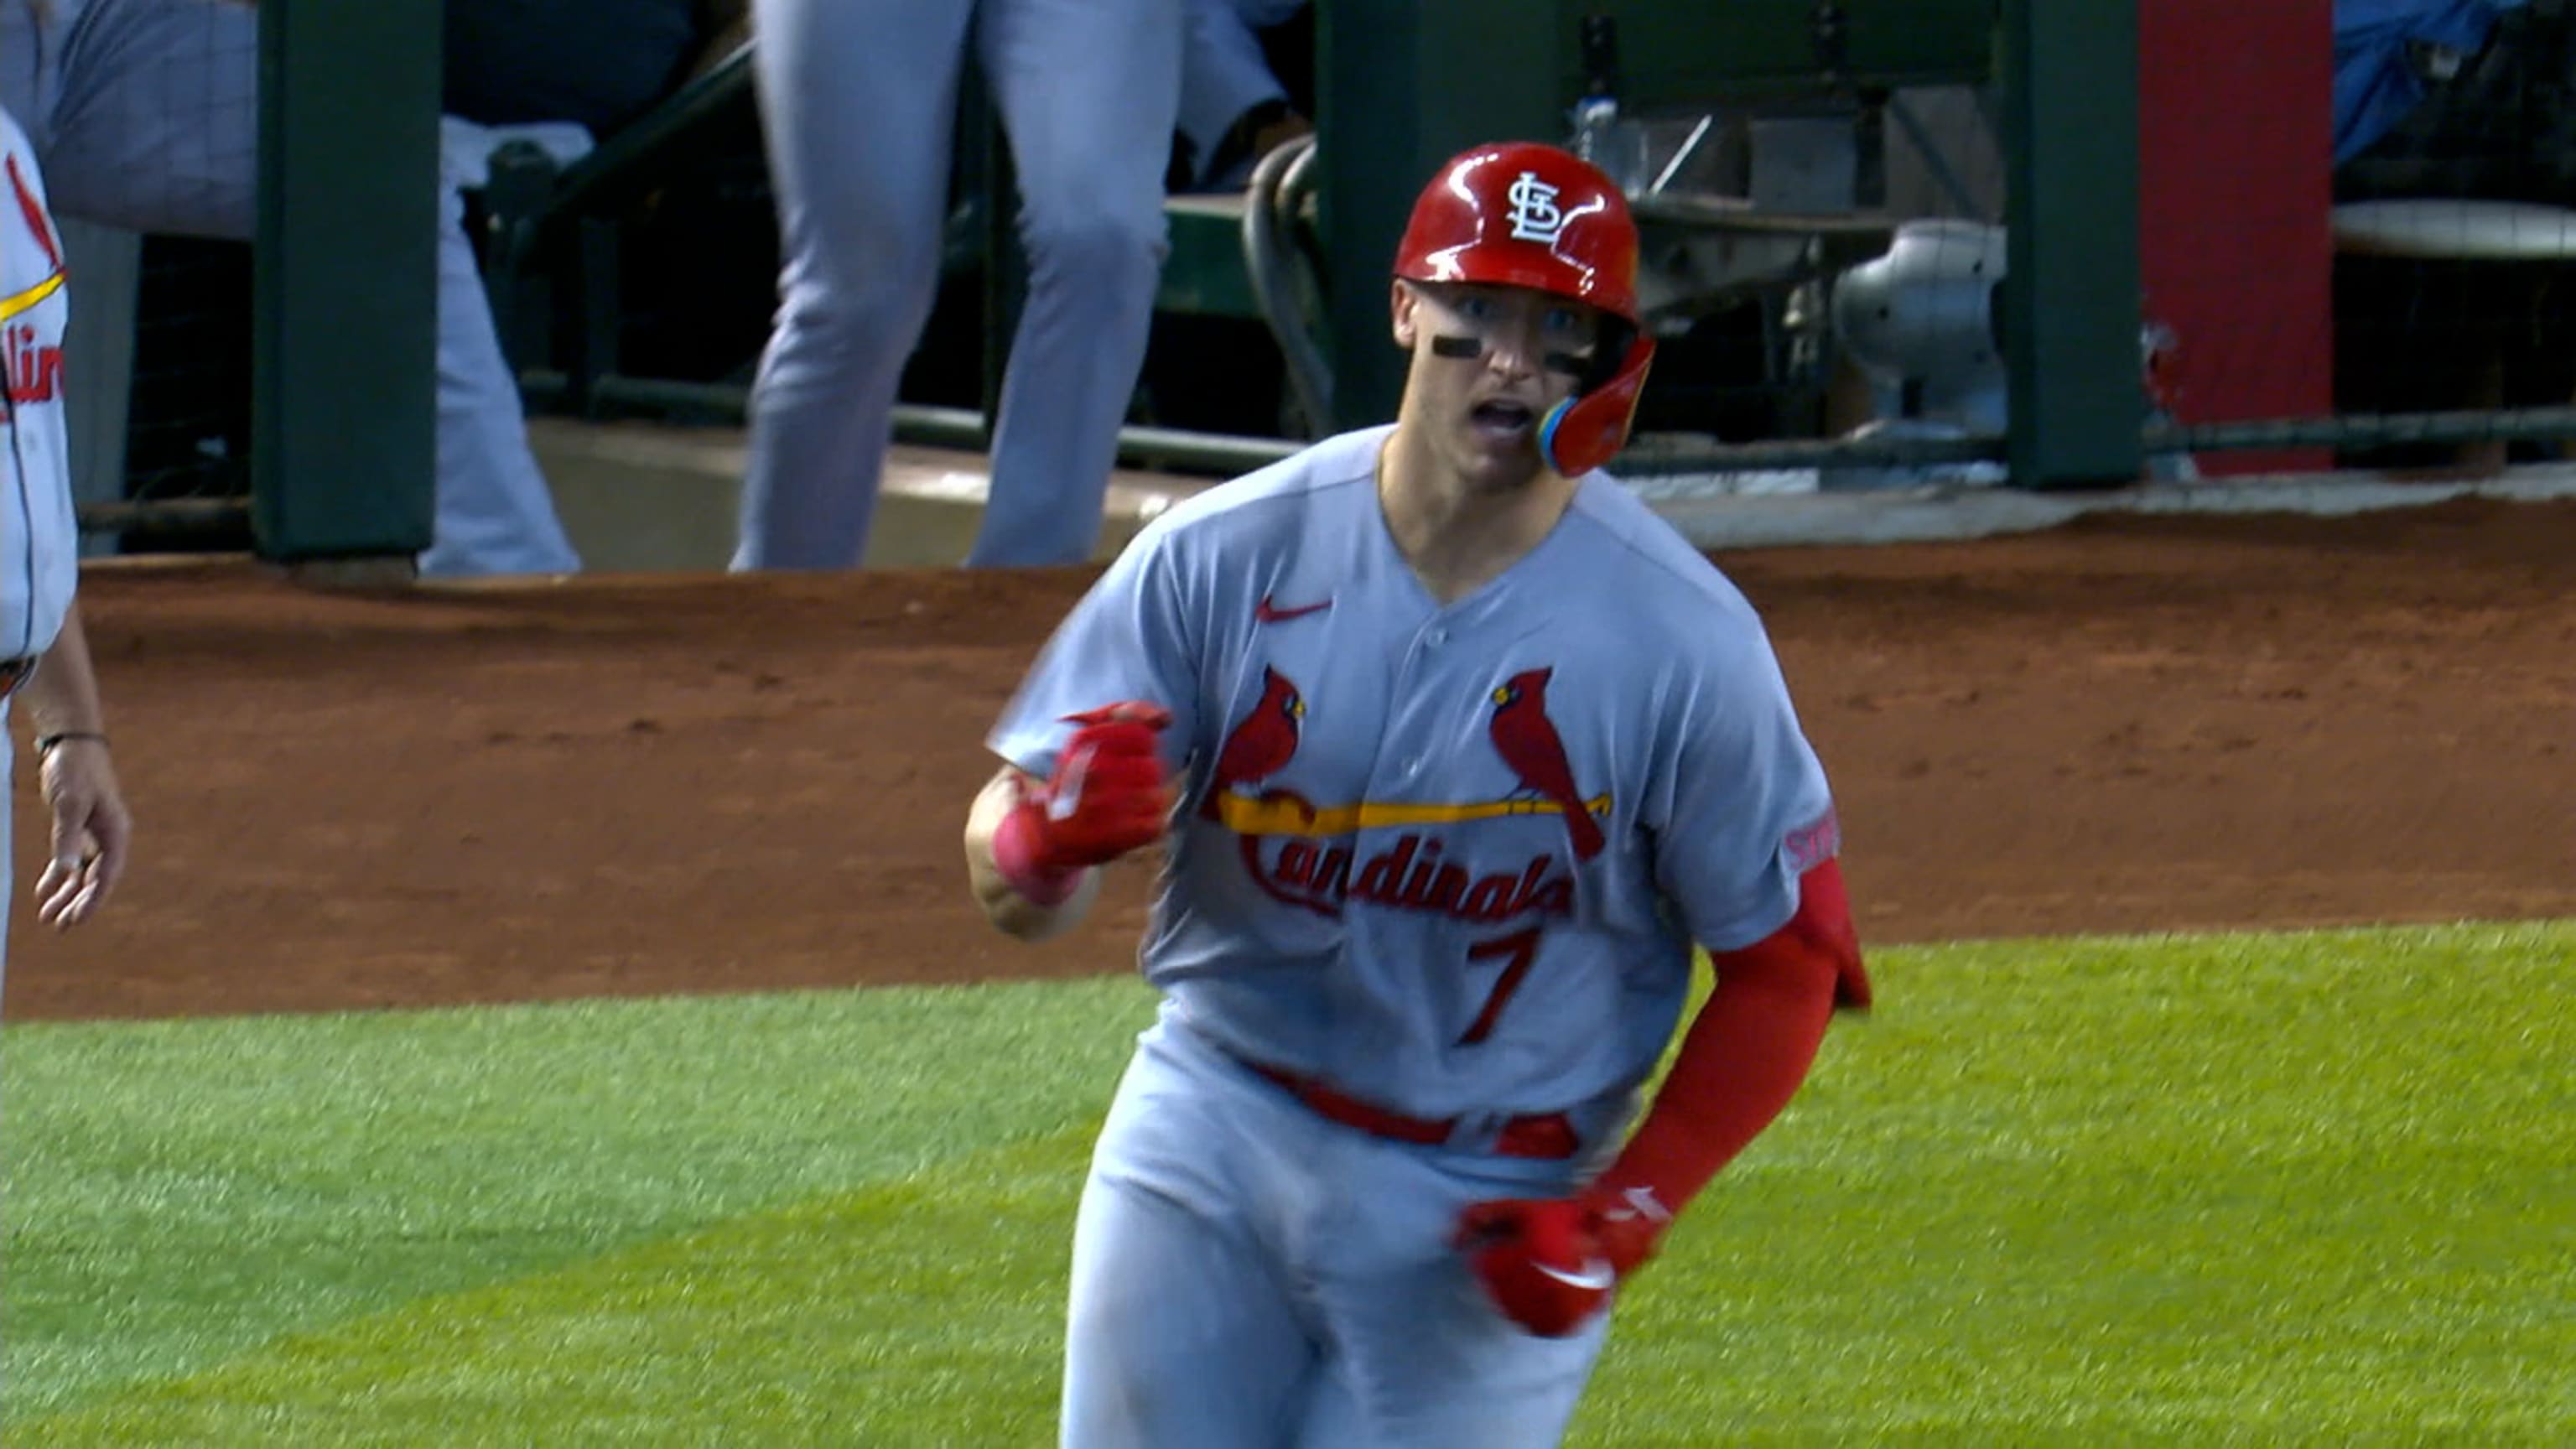 Gorman sparks Cardinals to series sweep of Marlins